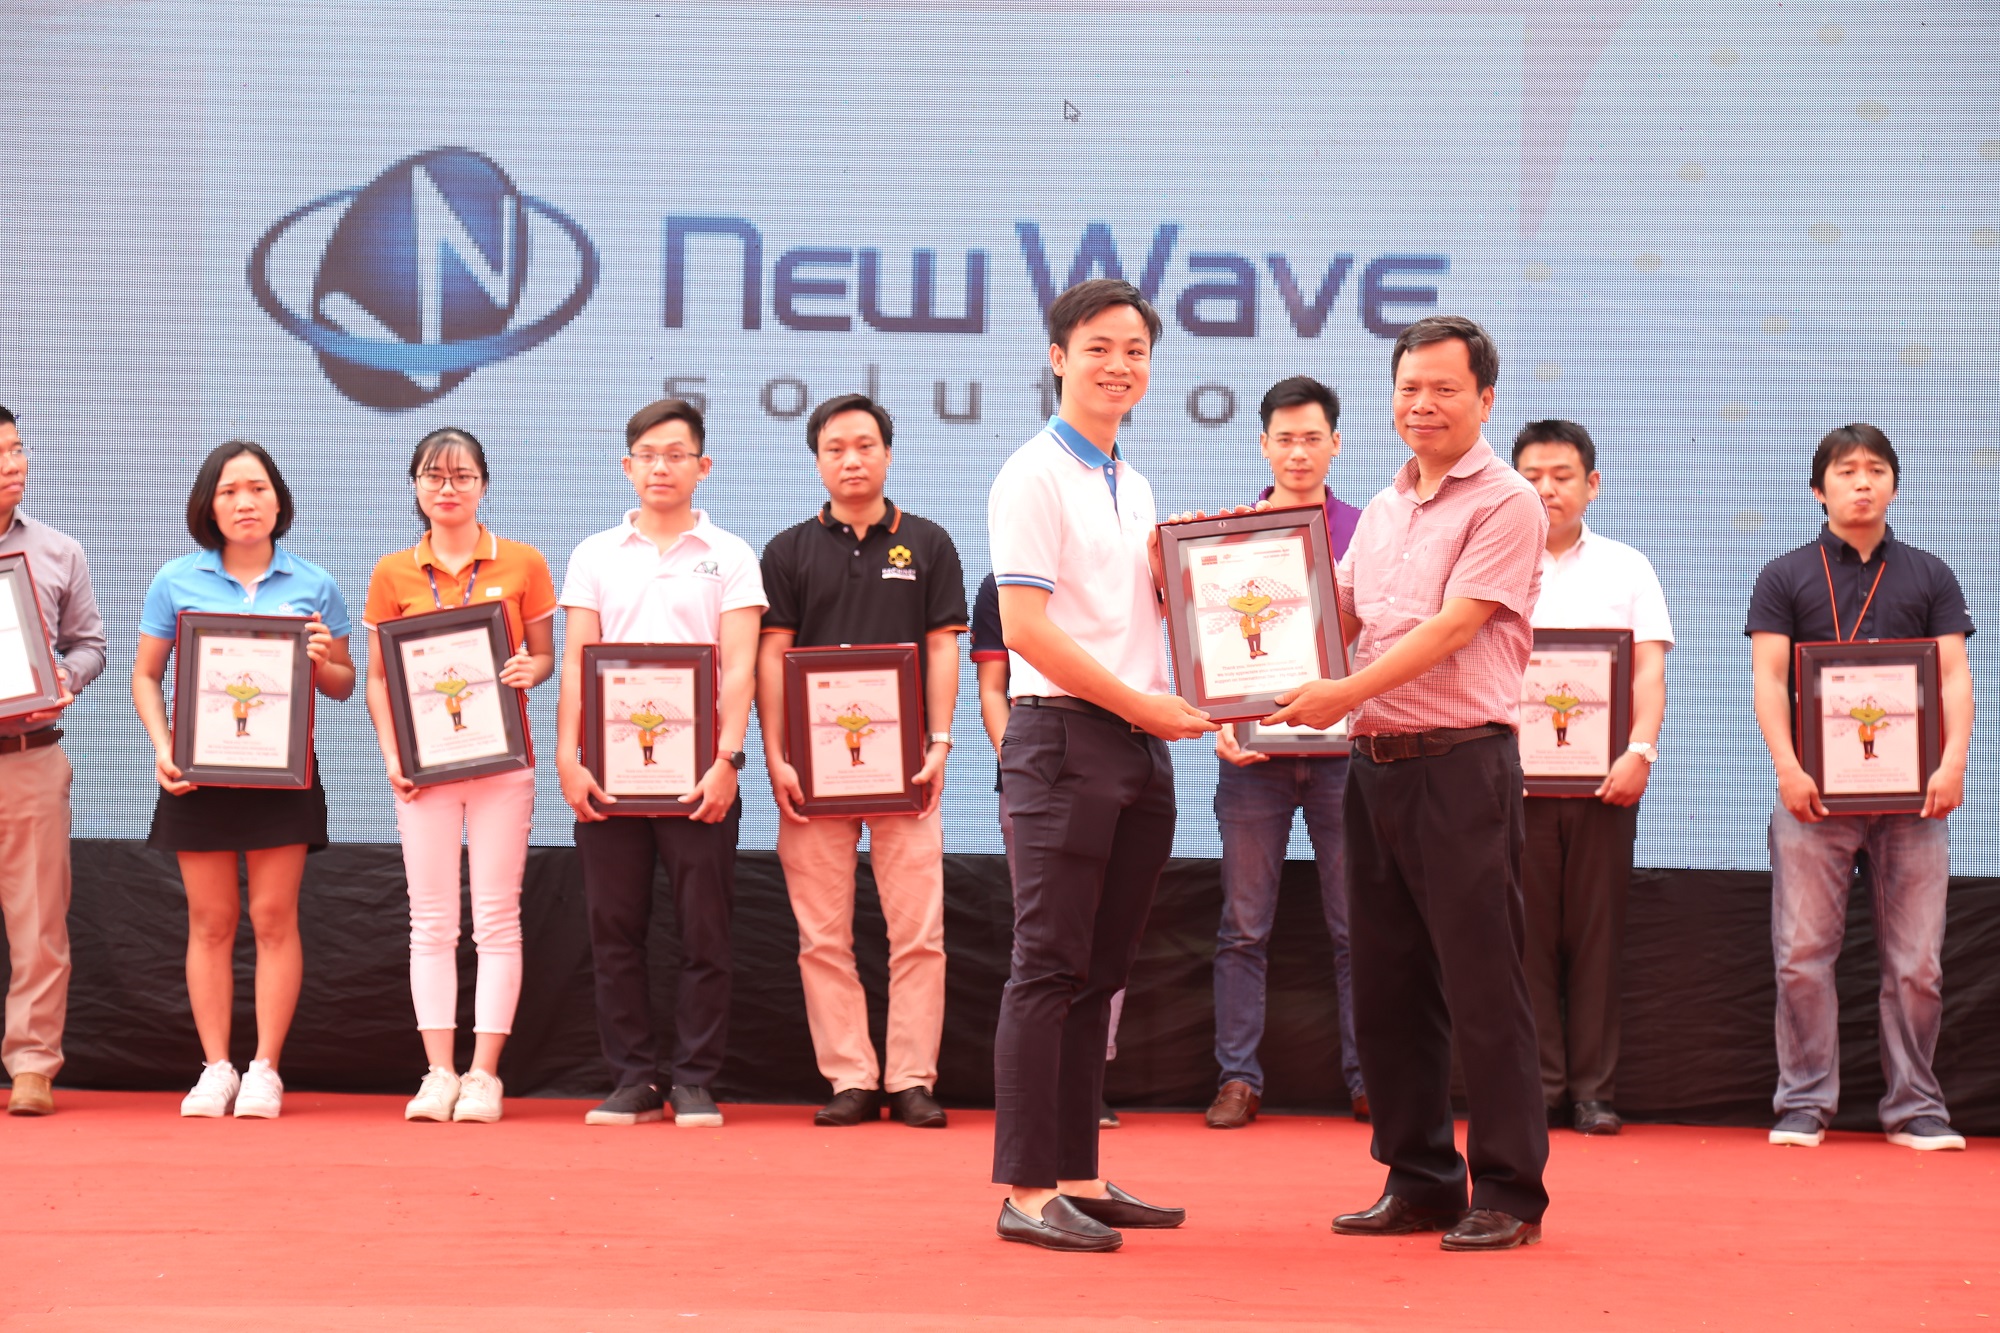 Newwave Solutions also had the pleasure to be the sponsor to reward leading students of FPT